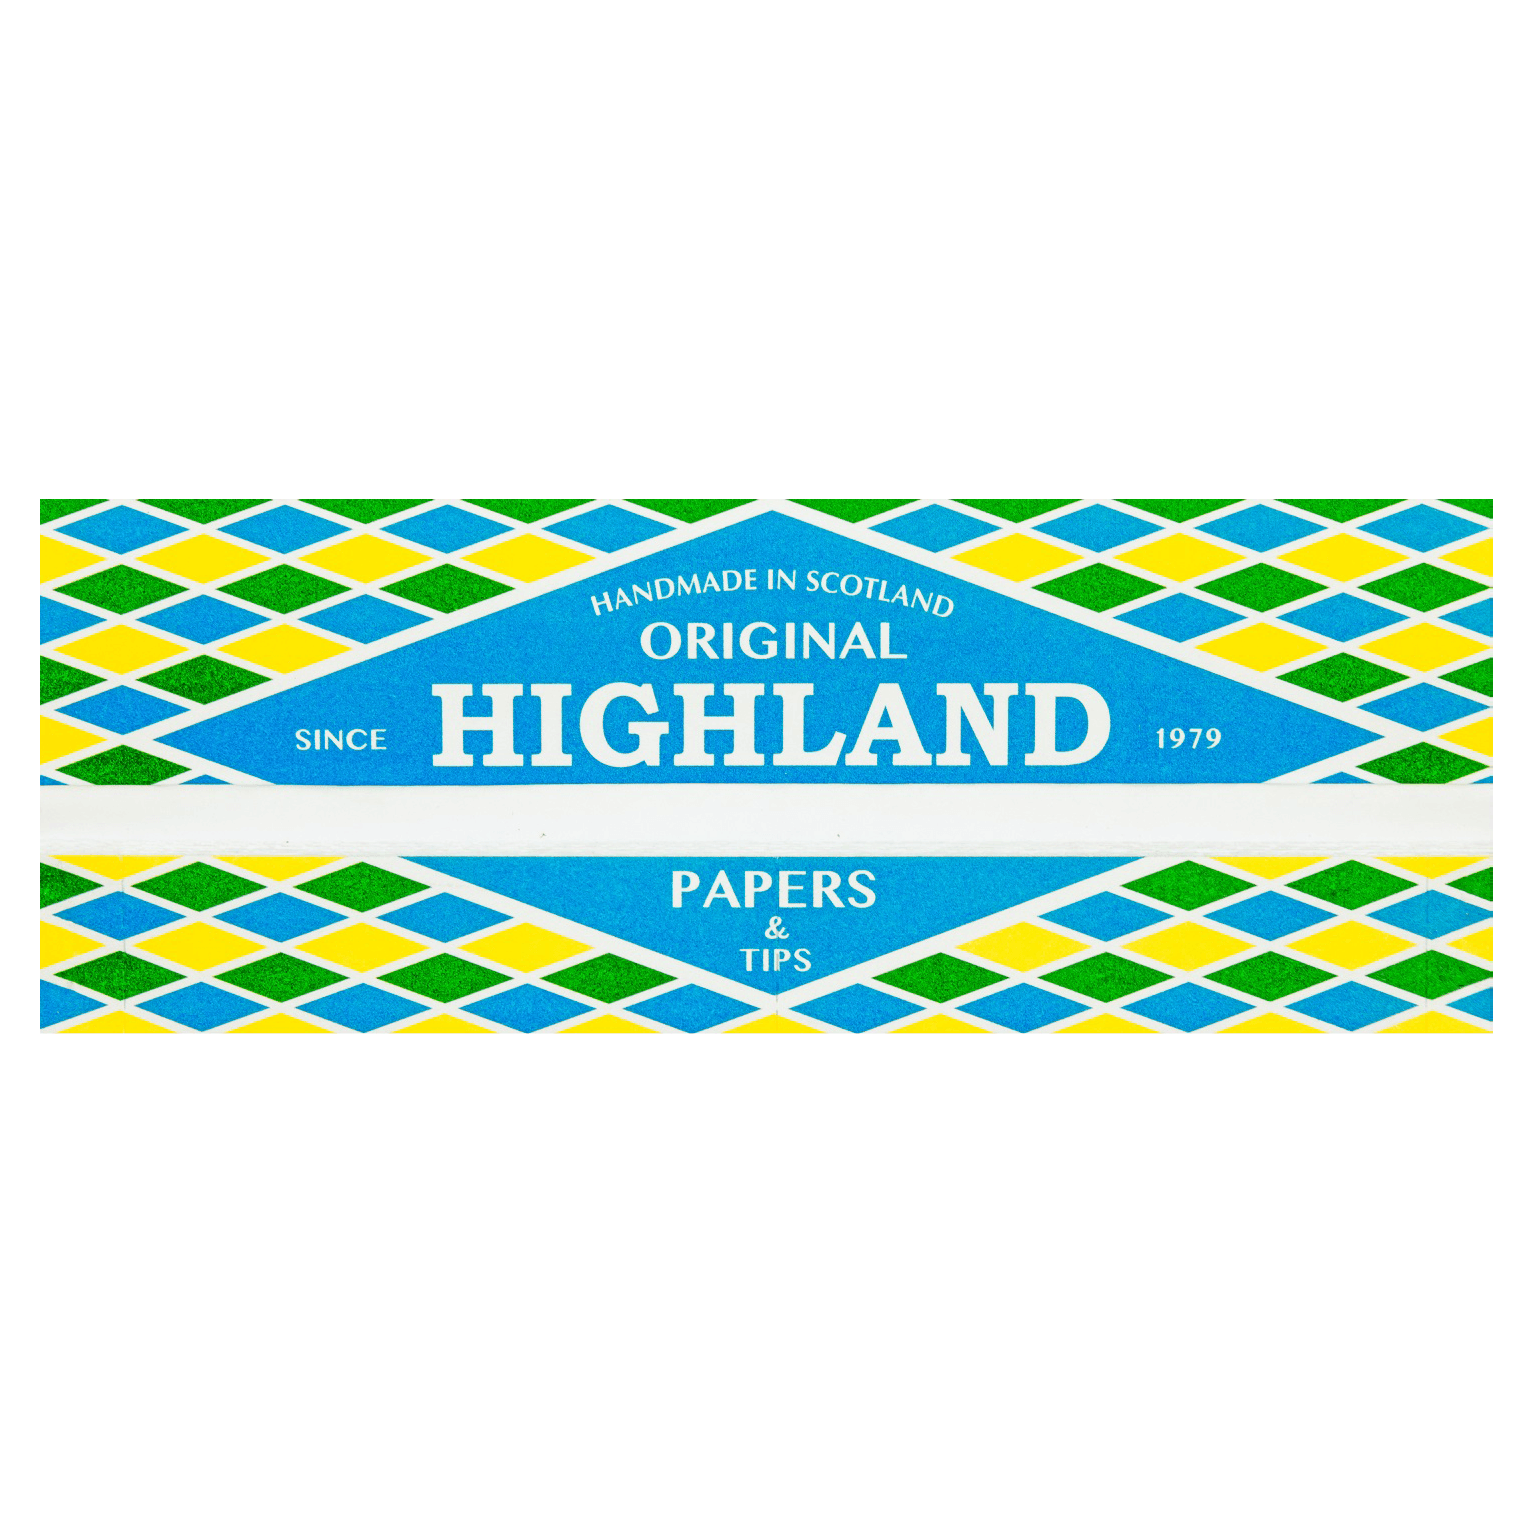 HIGHLAND DOUBLE DECADENCE ORIGINAL XTRA LONG ROLLING PAPERS - munchterm